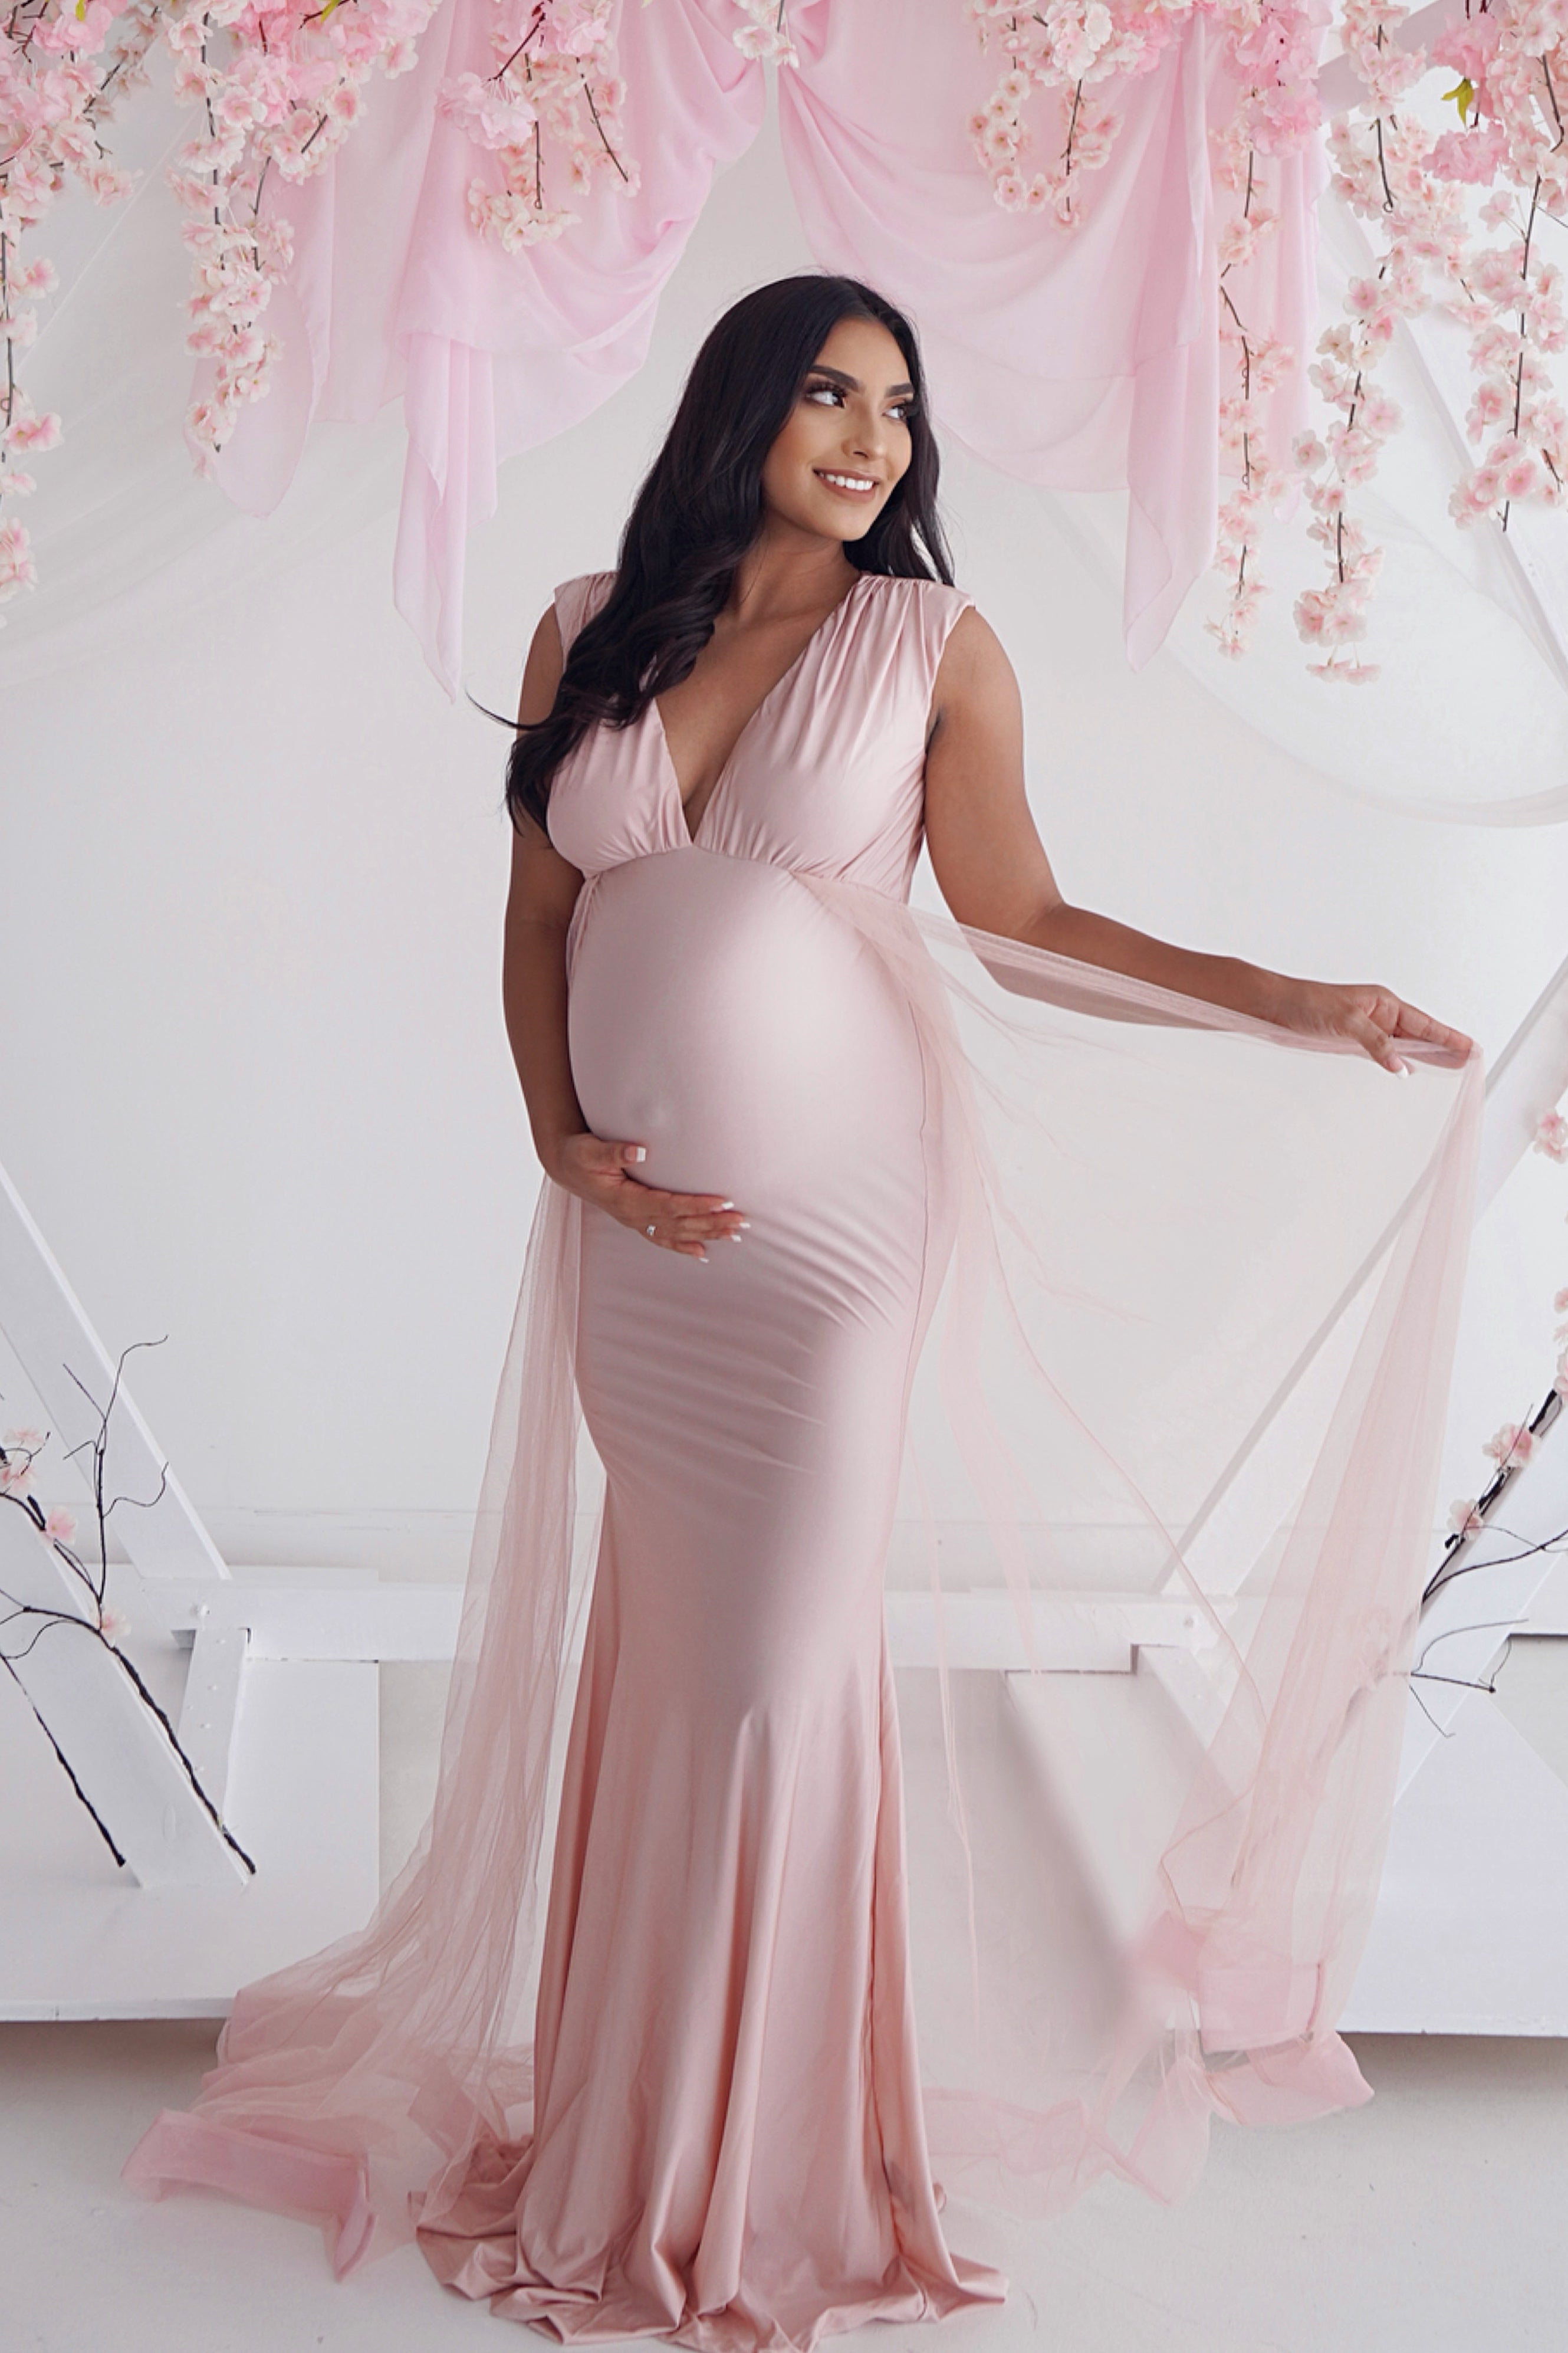 Hannah lace sleeve maternity dress - Miss Madison Boutique Maternity, Pregnancy  Gowns, Dresses for Photography, Photoshoot, Bridesmaid, Babyshower